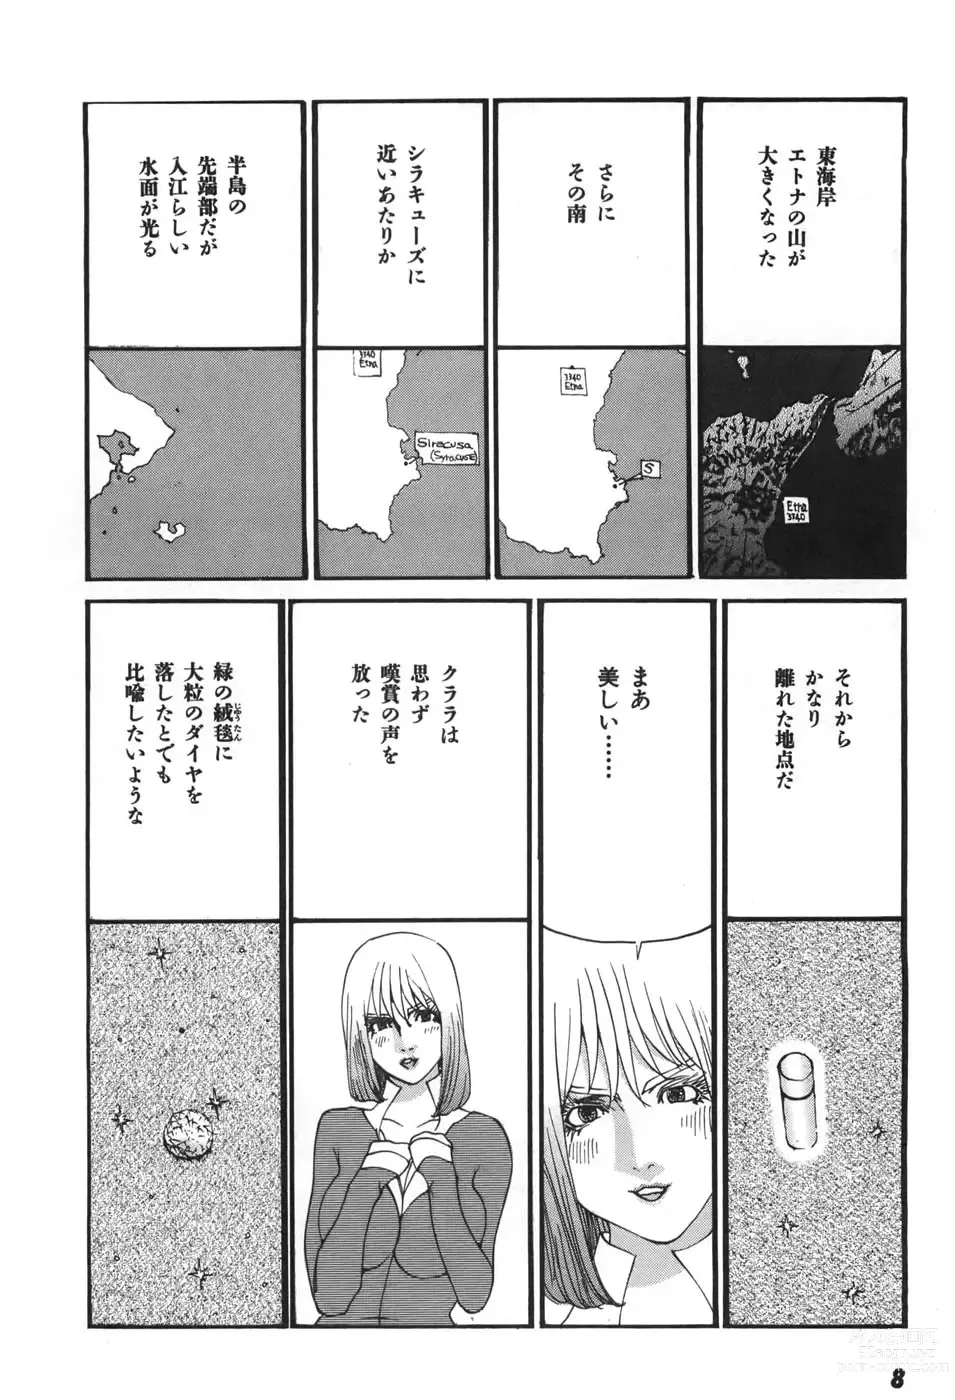 Page 10 of doujinshi Yapoo the human cattle vol.06